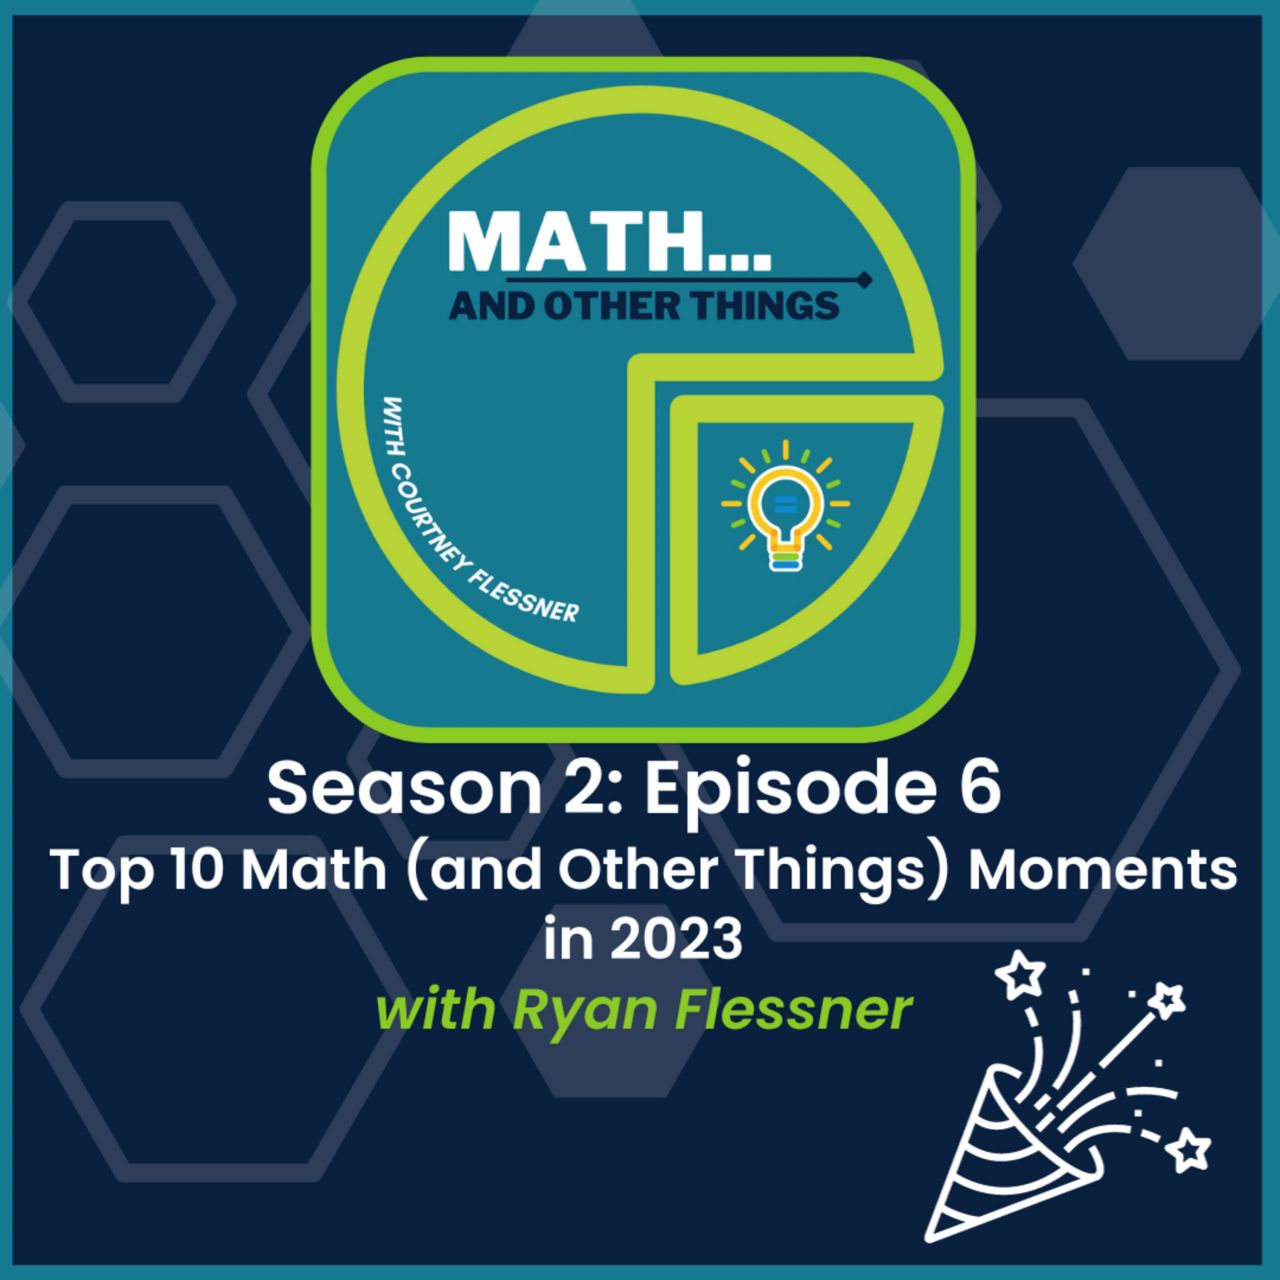 Top 10 Math (and Other Things) in 2023 with Ryan Flessner